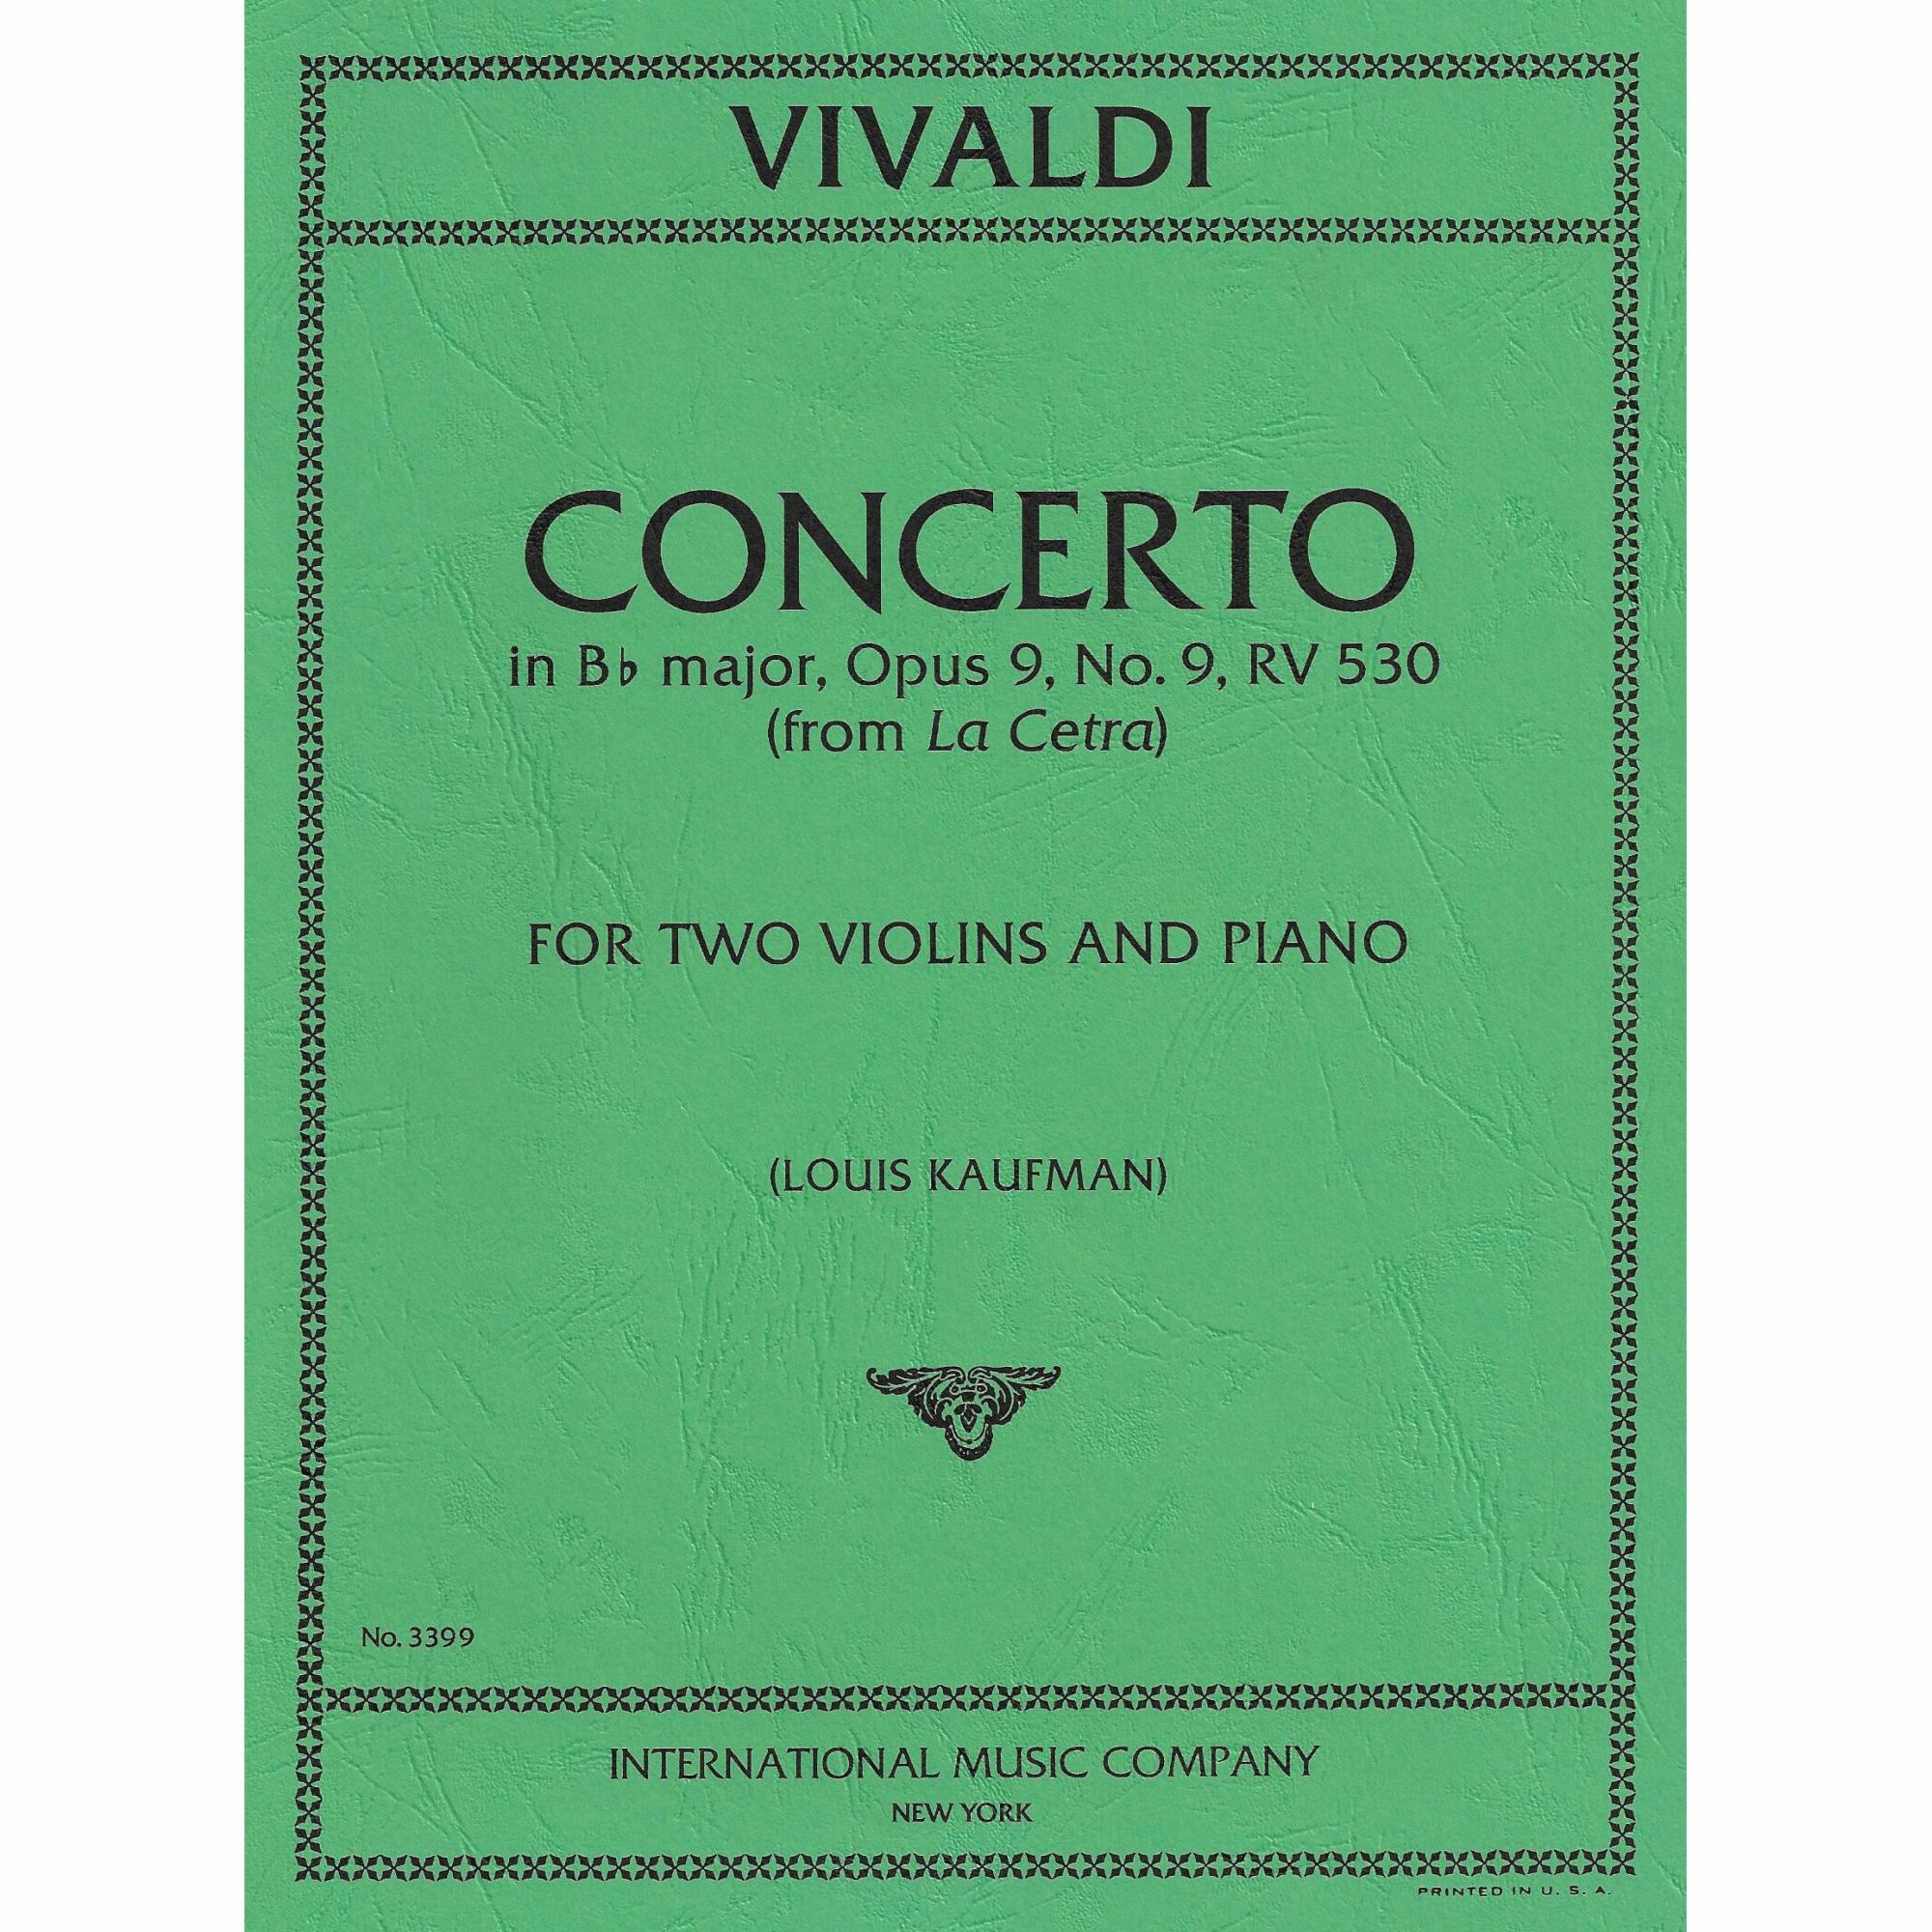 Vivaldi -- Concerto in B-flat Major, Op. 9, No. 9 for Two Violins and Piano